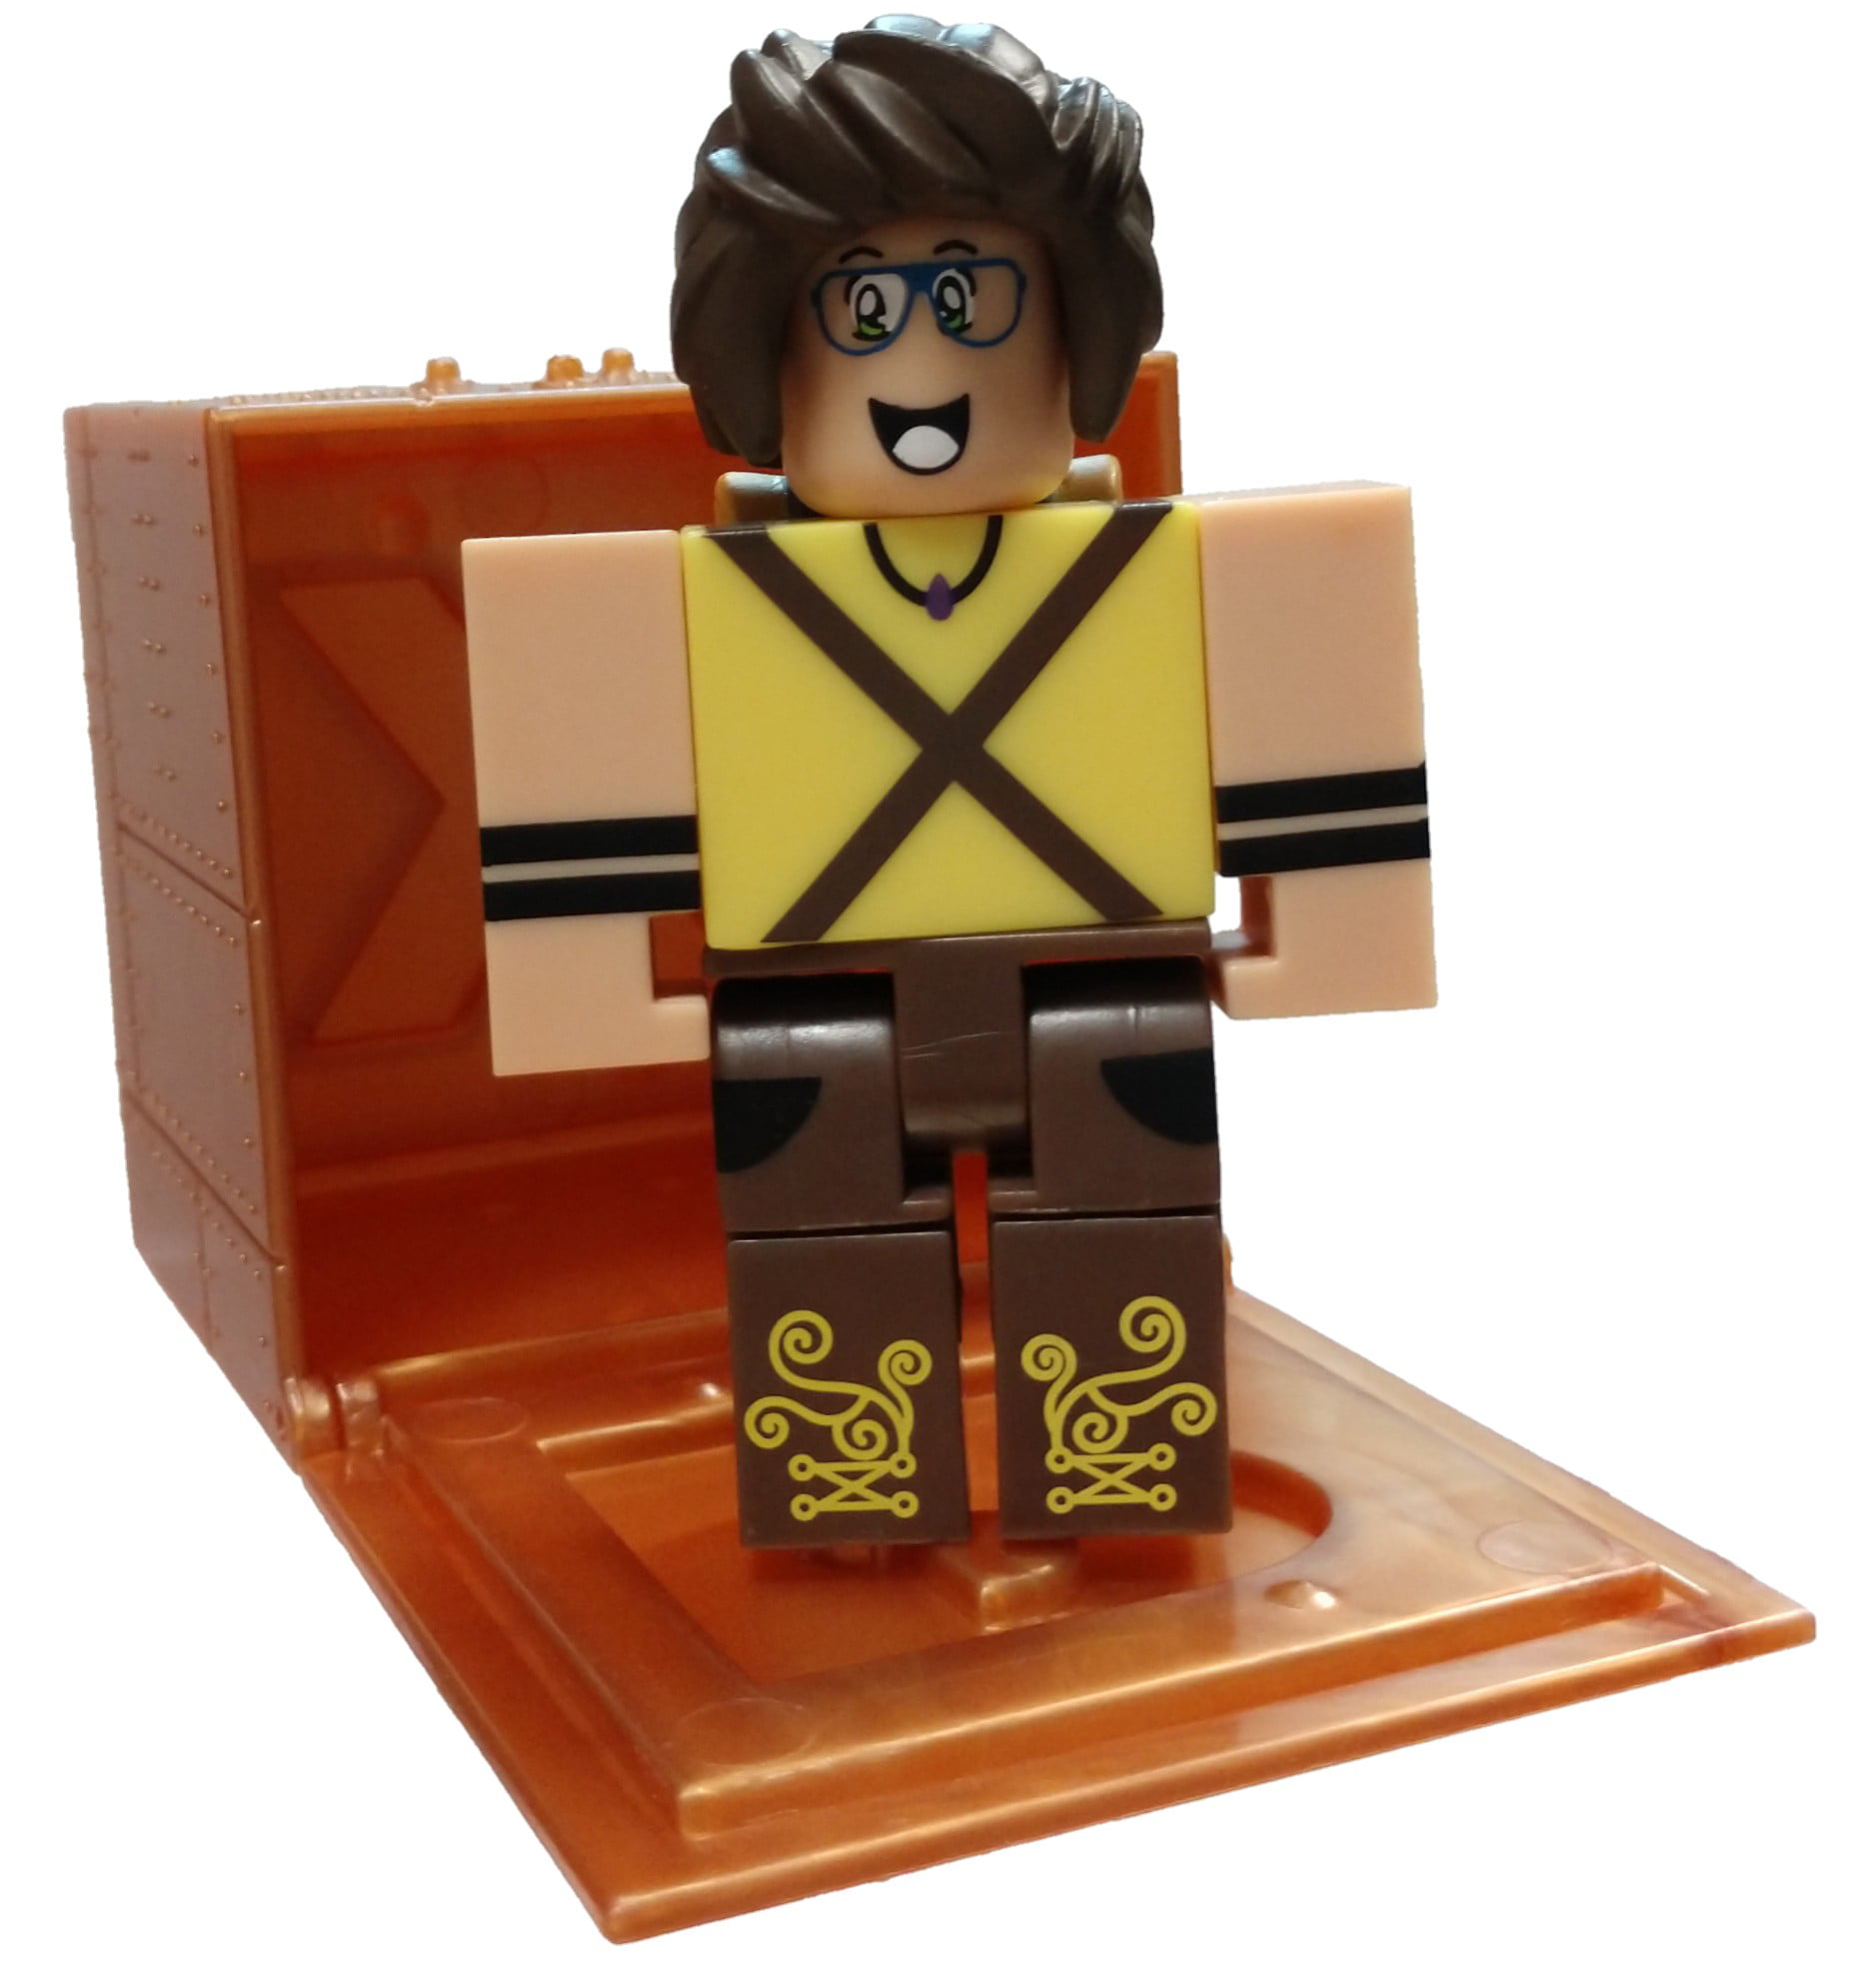 Roblox Series 8 Ghost Simulator Dylan Mini Figure With Cube And Online Code No Packaging Walmart Com Walmart Com - the flash simulator roblox